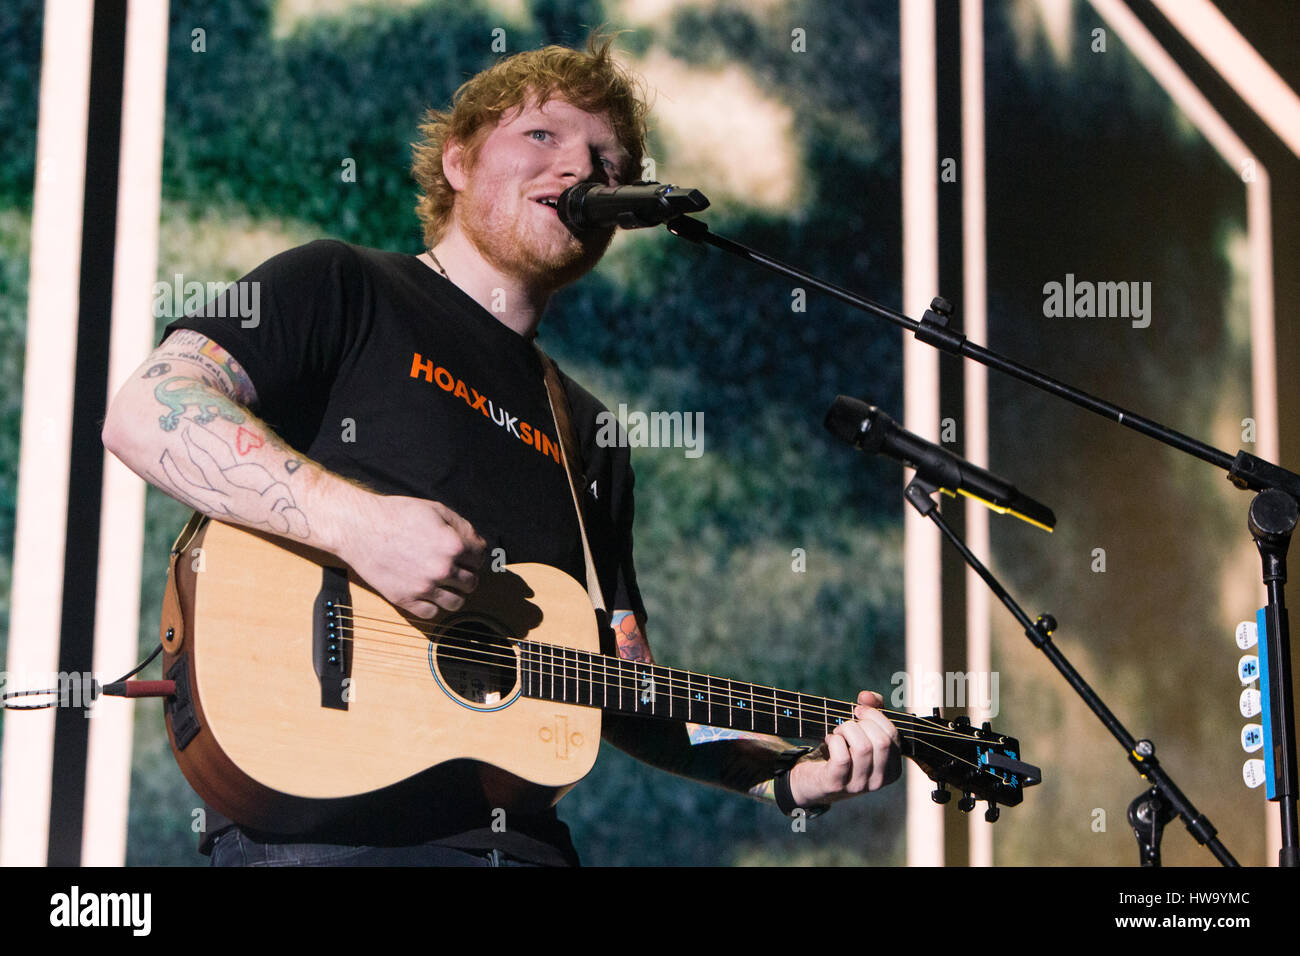 Turin Italy. 16th March 2017. The English singer-songwriter ED SHEERAN performs live on stage at PalaAlpitour during the 'Divide Tour 2017' Stock Photo